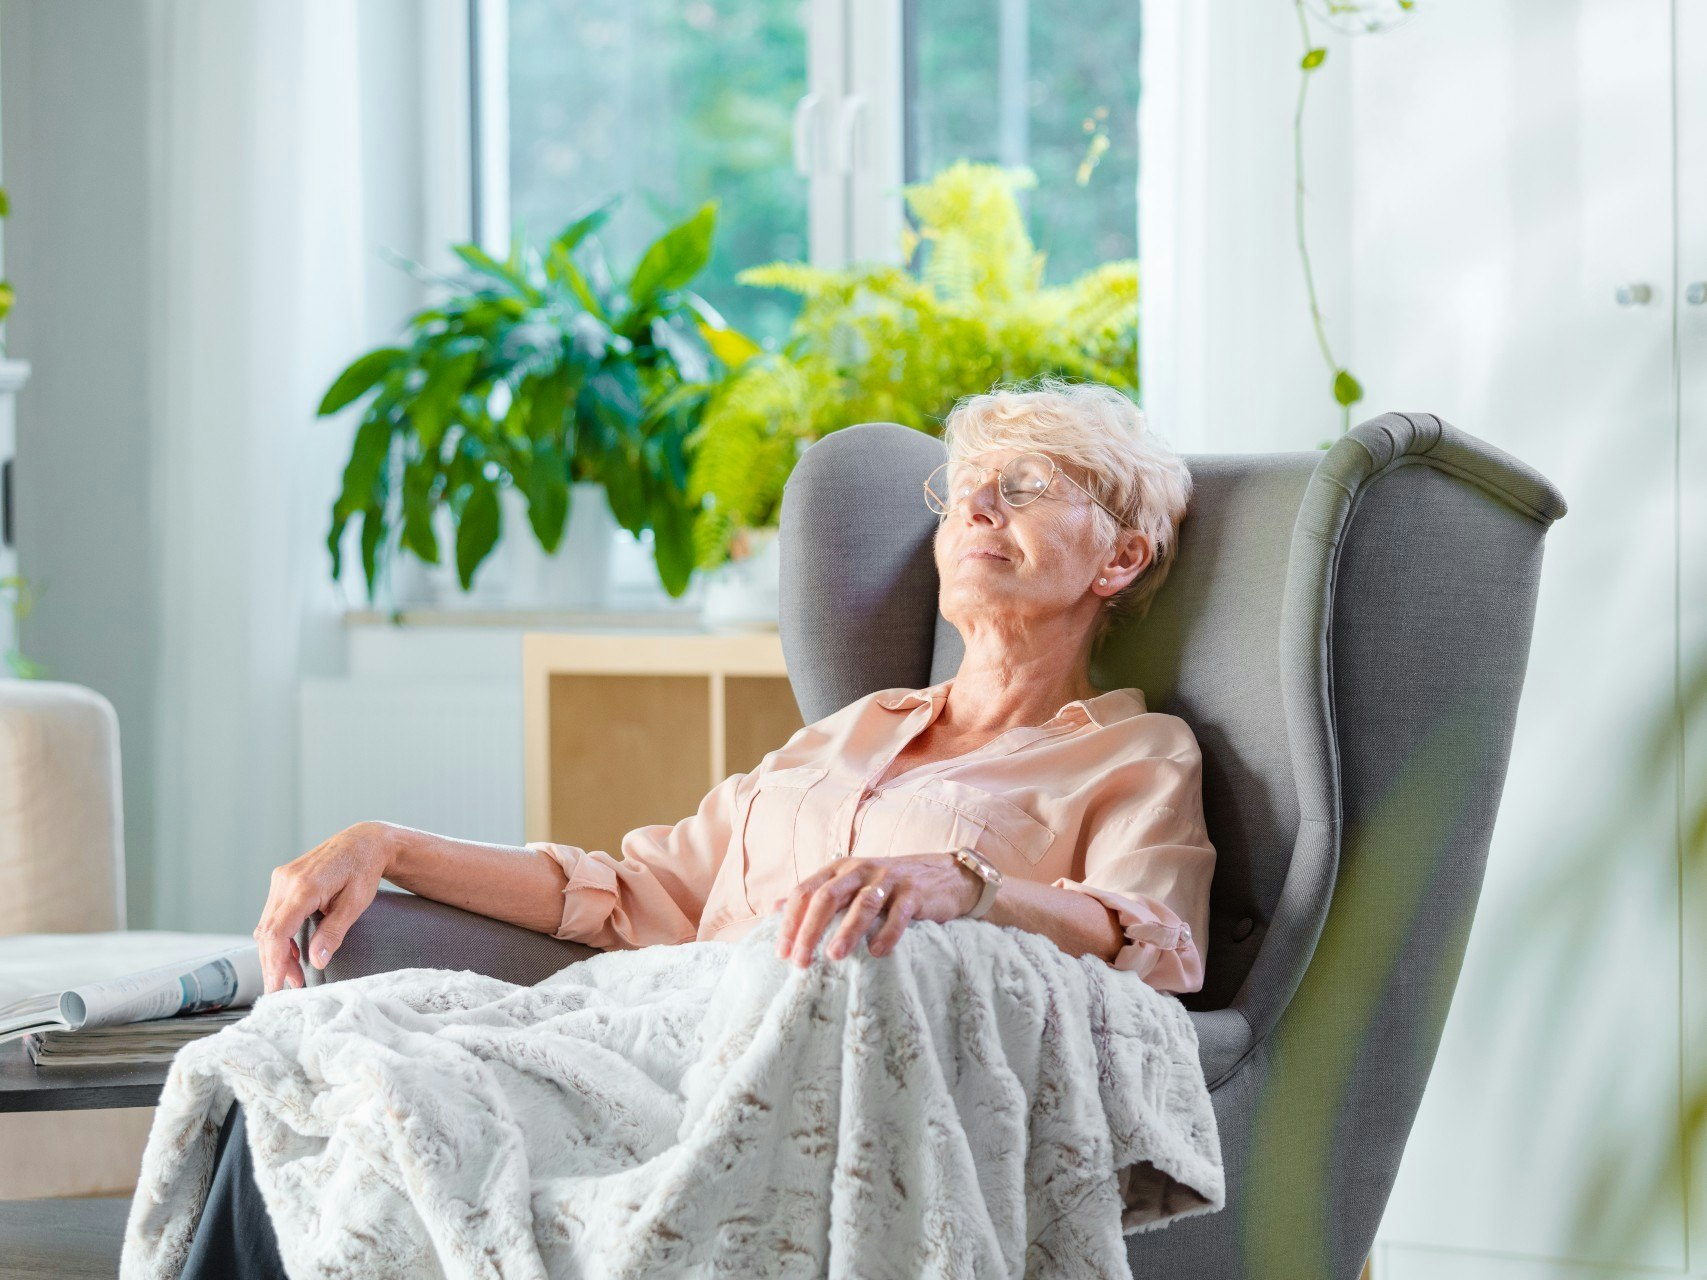 <p>The carer and care recipient will benefit from short term respite, allowing them to feel rejuvenated next time they see each other. [Source: iStock]</p>
